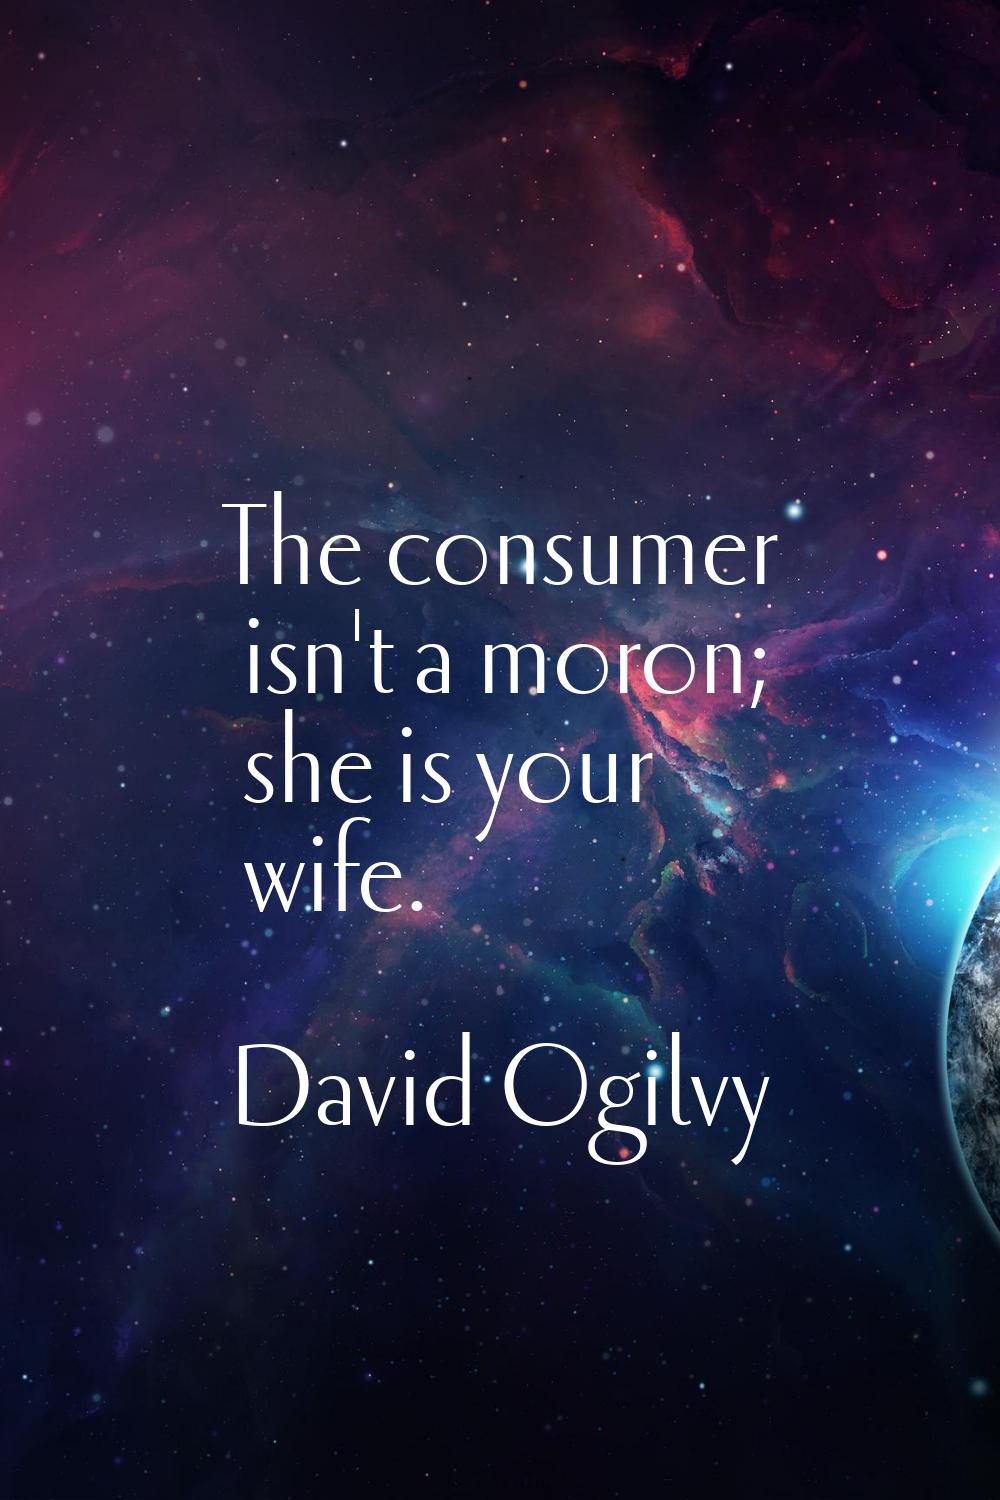 The consumer isn't a moron; she is your wife.